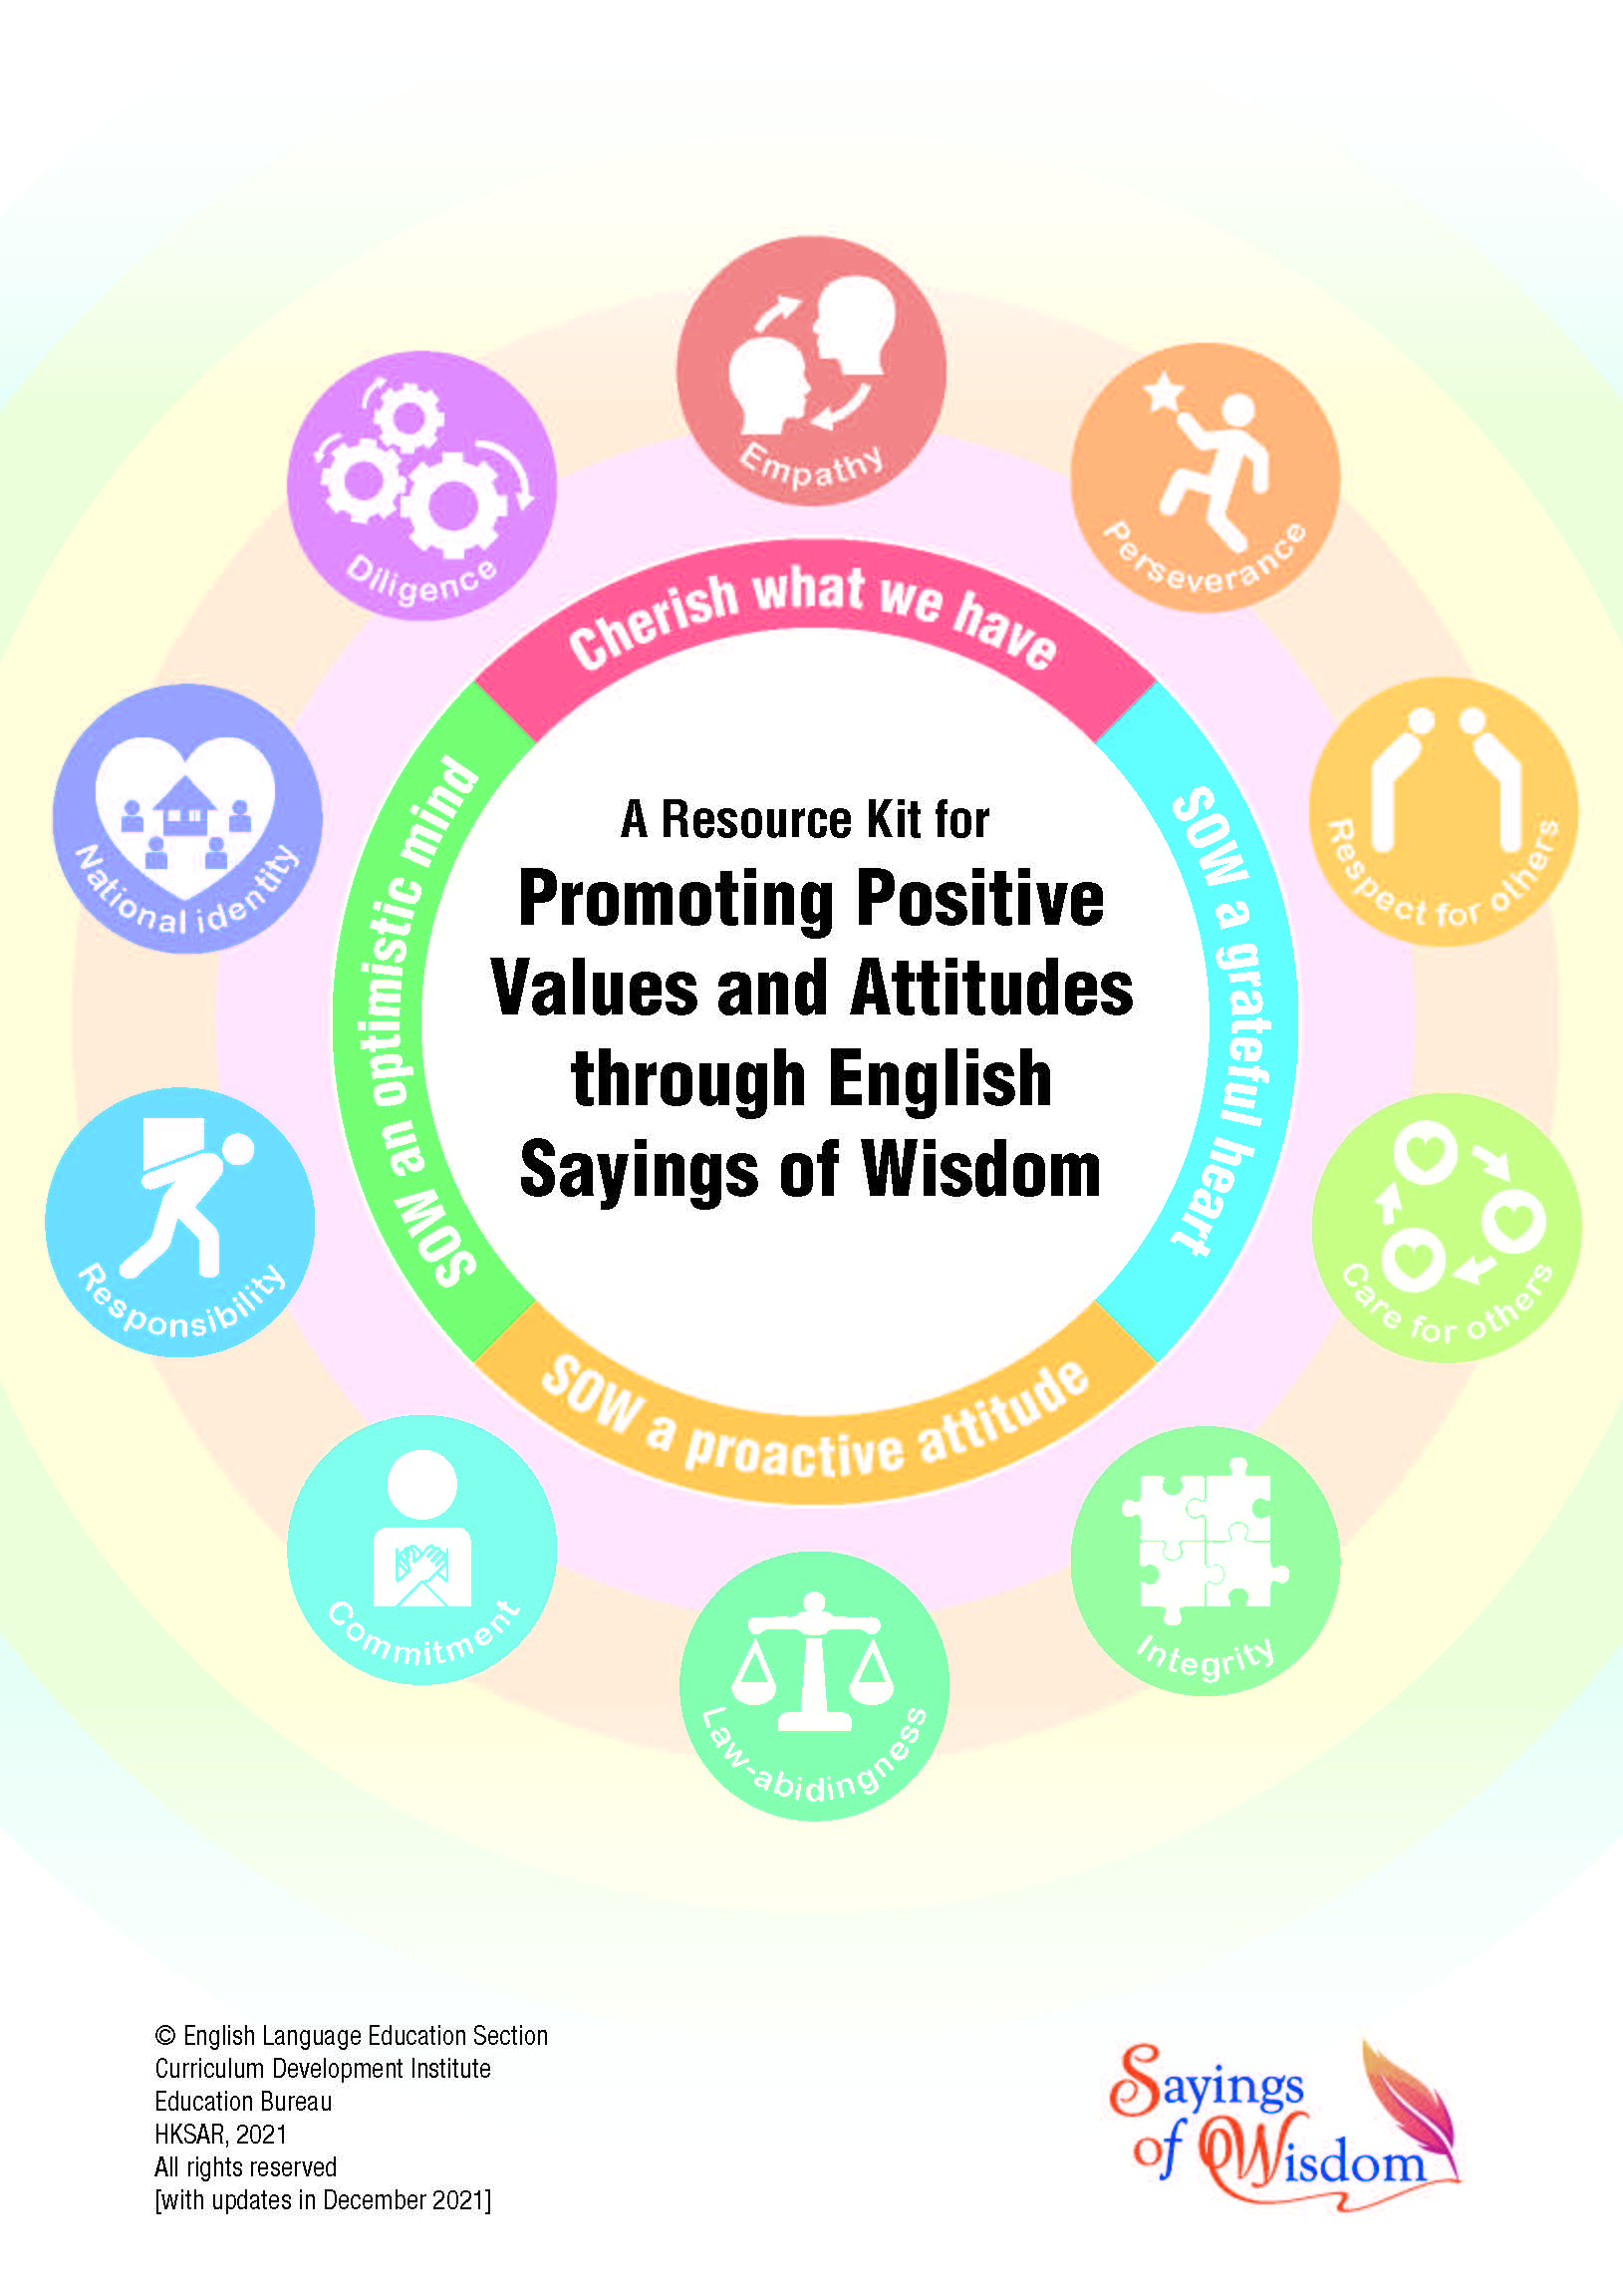 A Resource Kit for Promoting Positive Values and Attitudes through English Sayings of WisdomWeek of Hope 